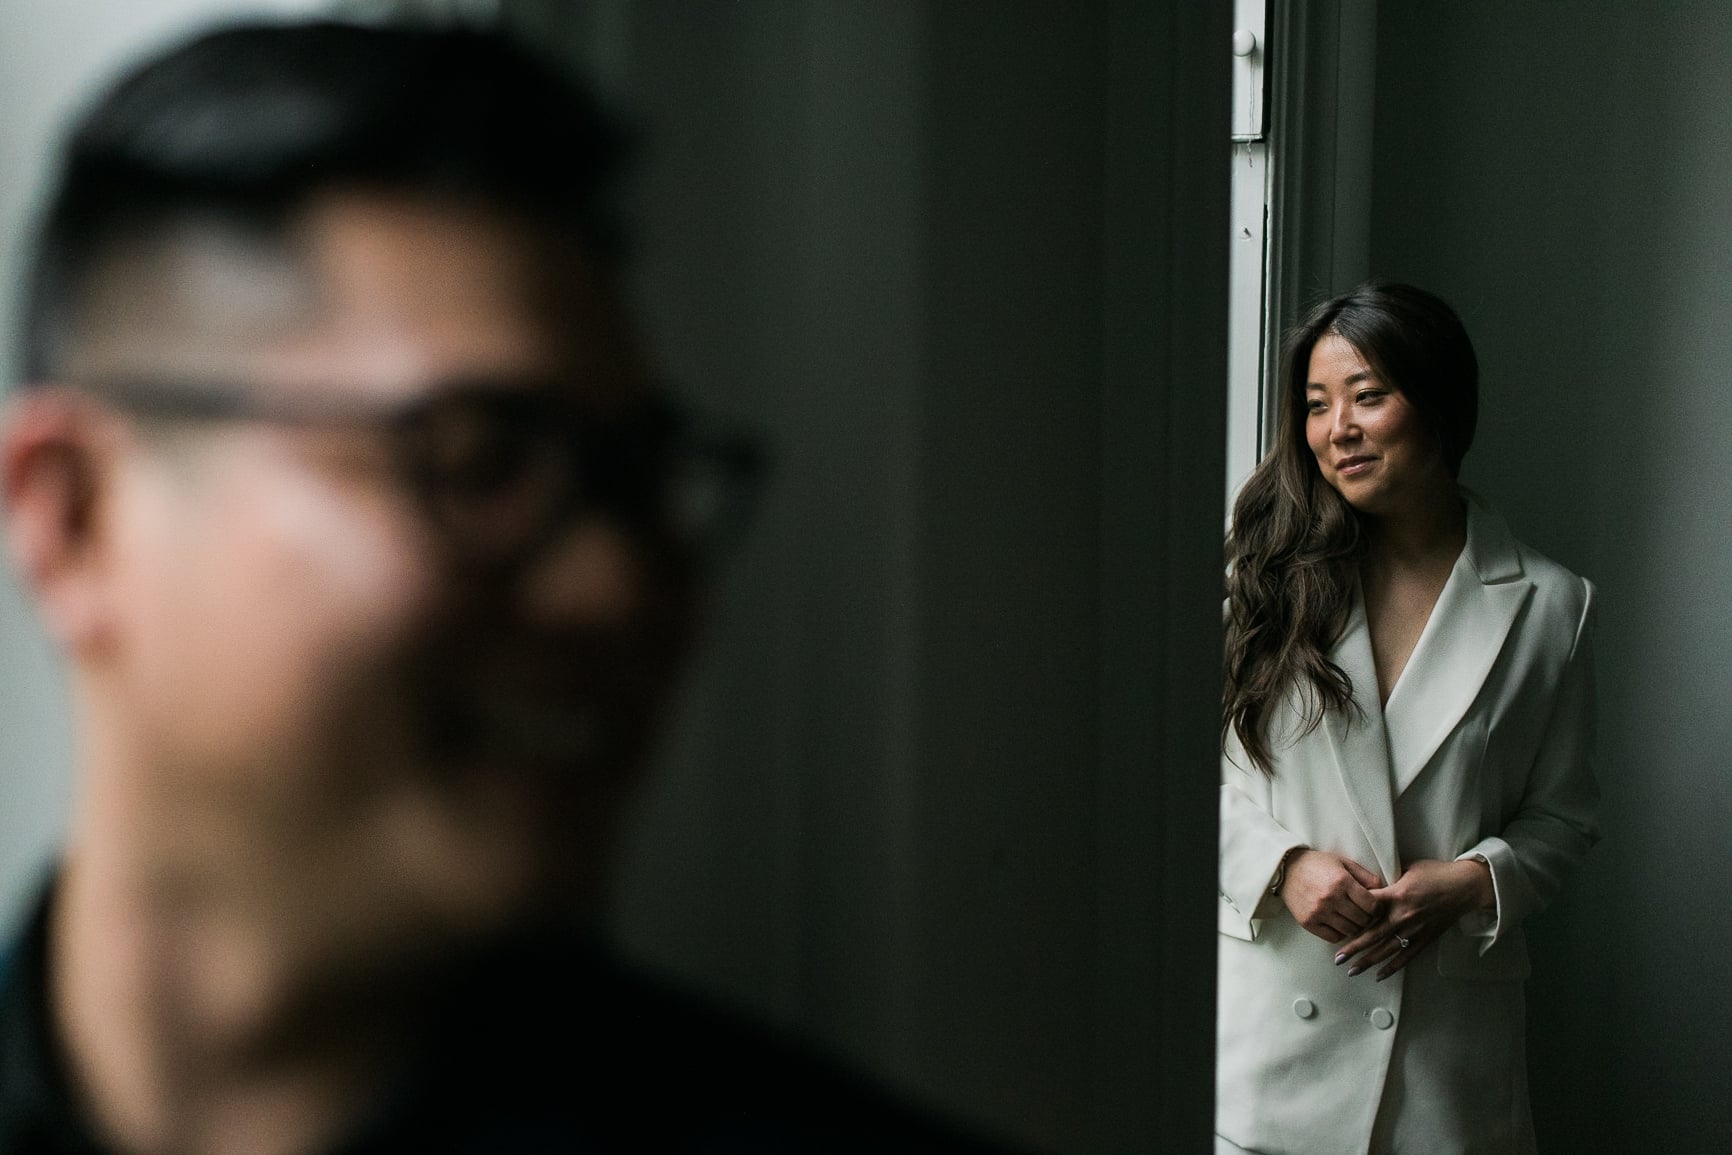 Brooklyn engagement session with NYC wedding photographer Ben Lau.